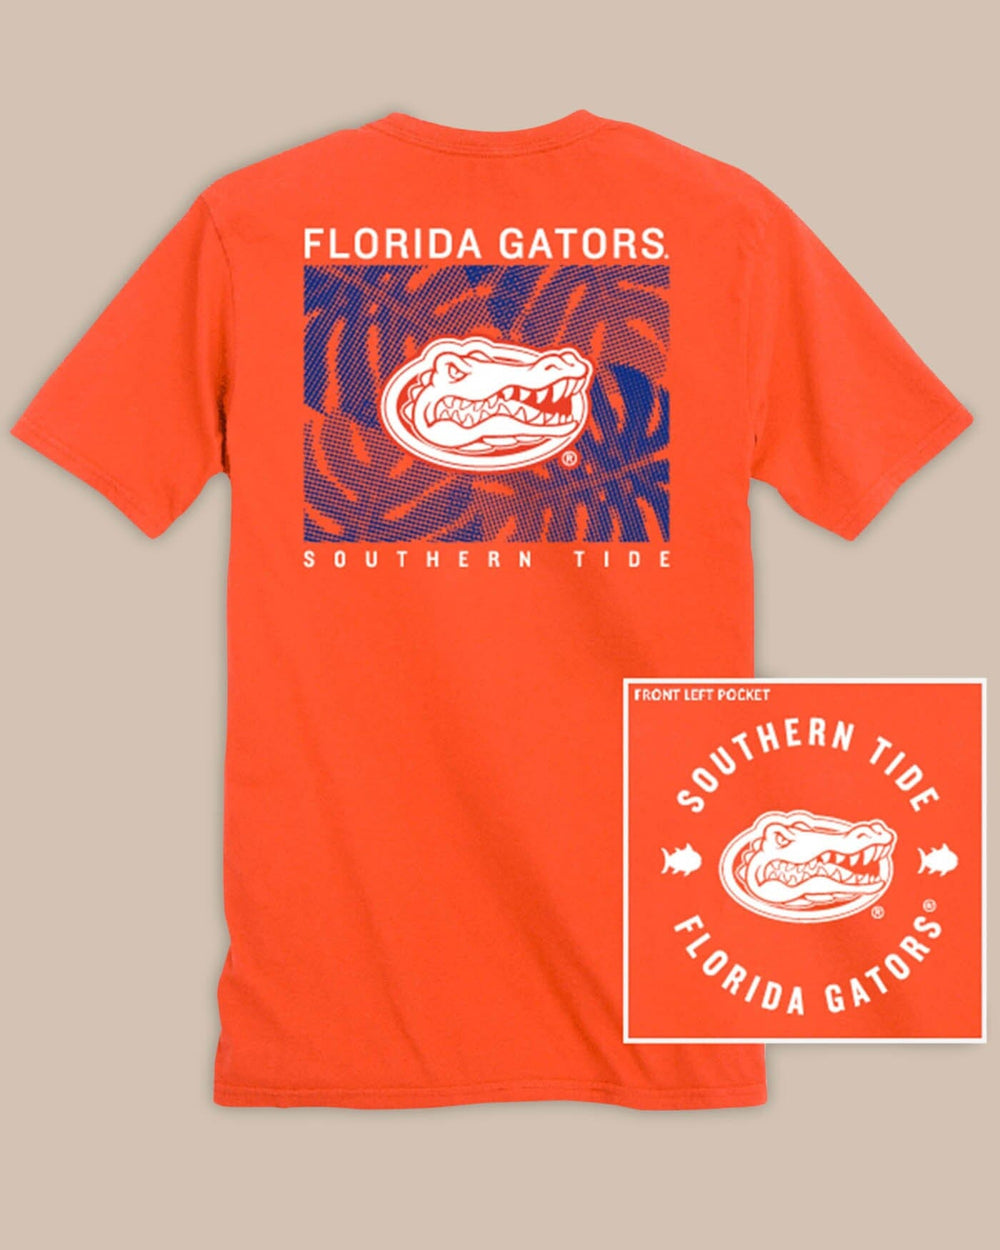 The front view of the Florida Gators Halftone Monstera T-Shirt by Southern Tide - Endzone Orange